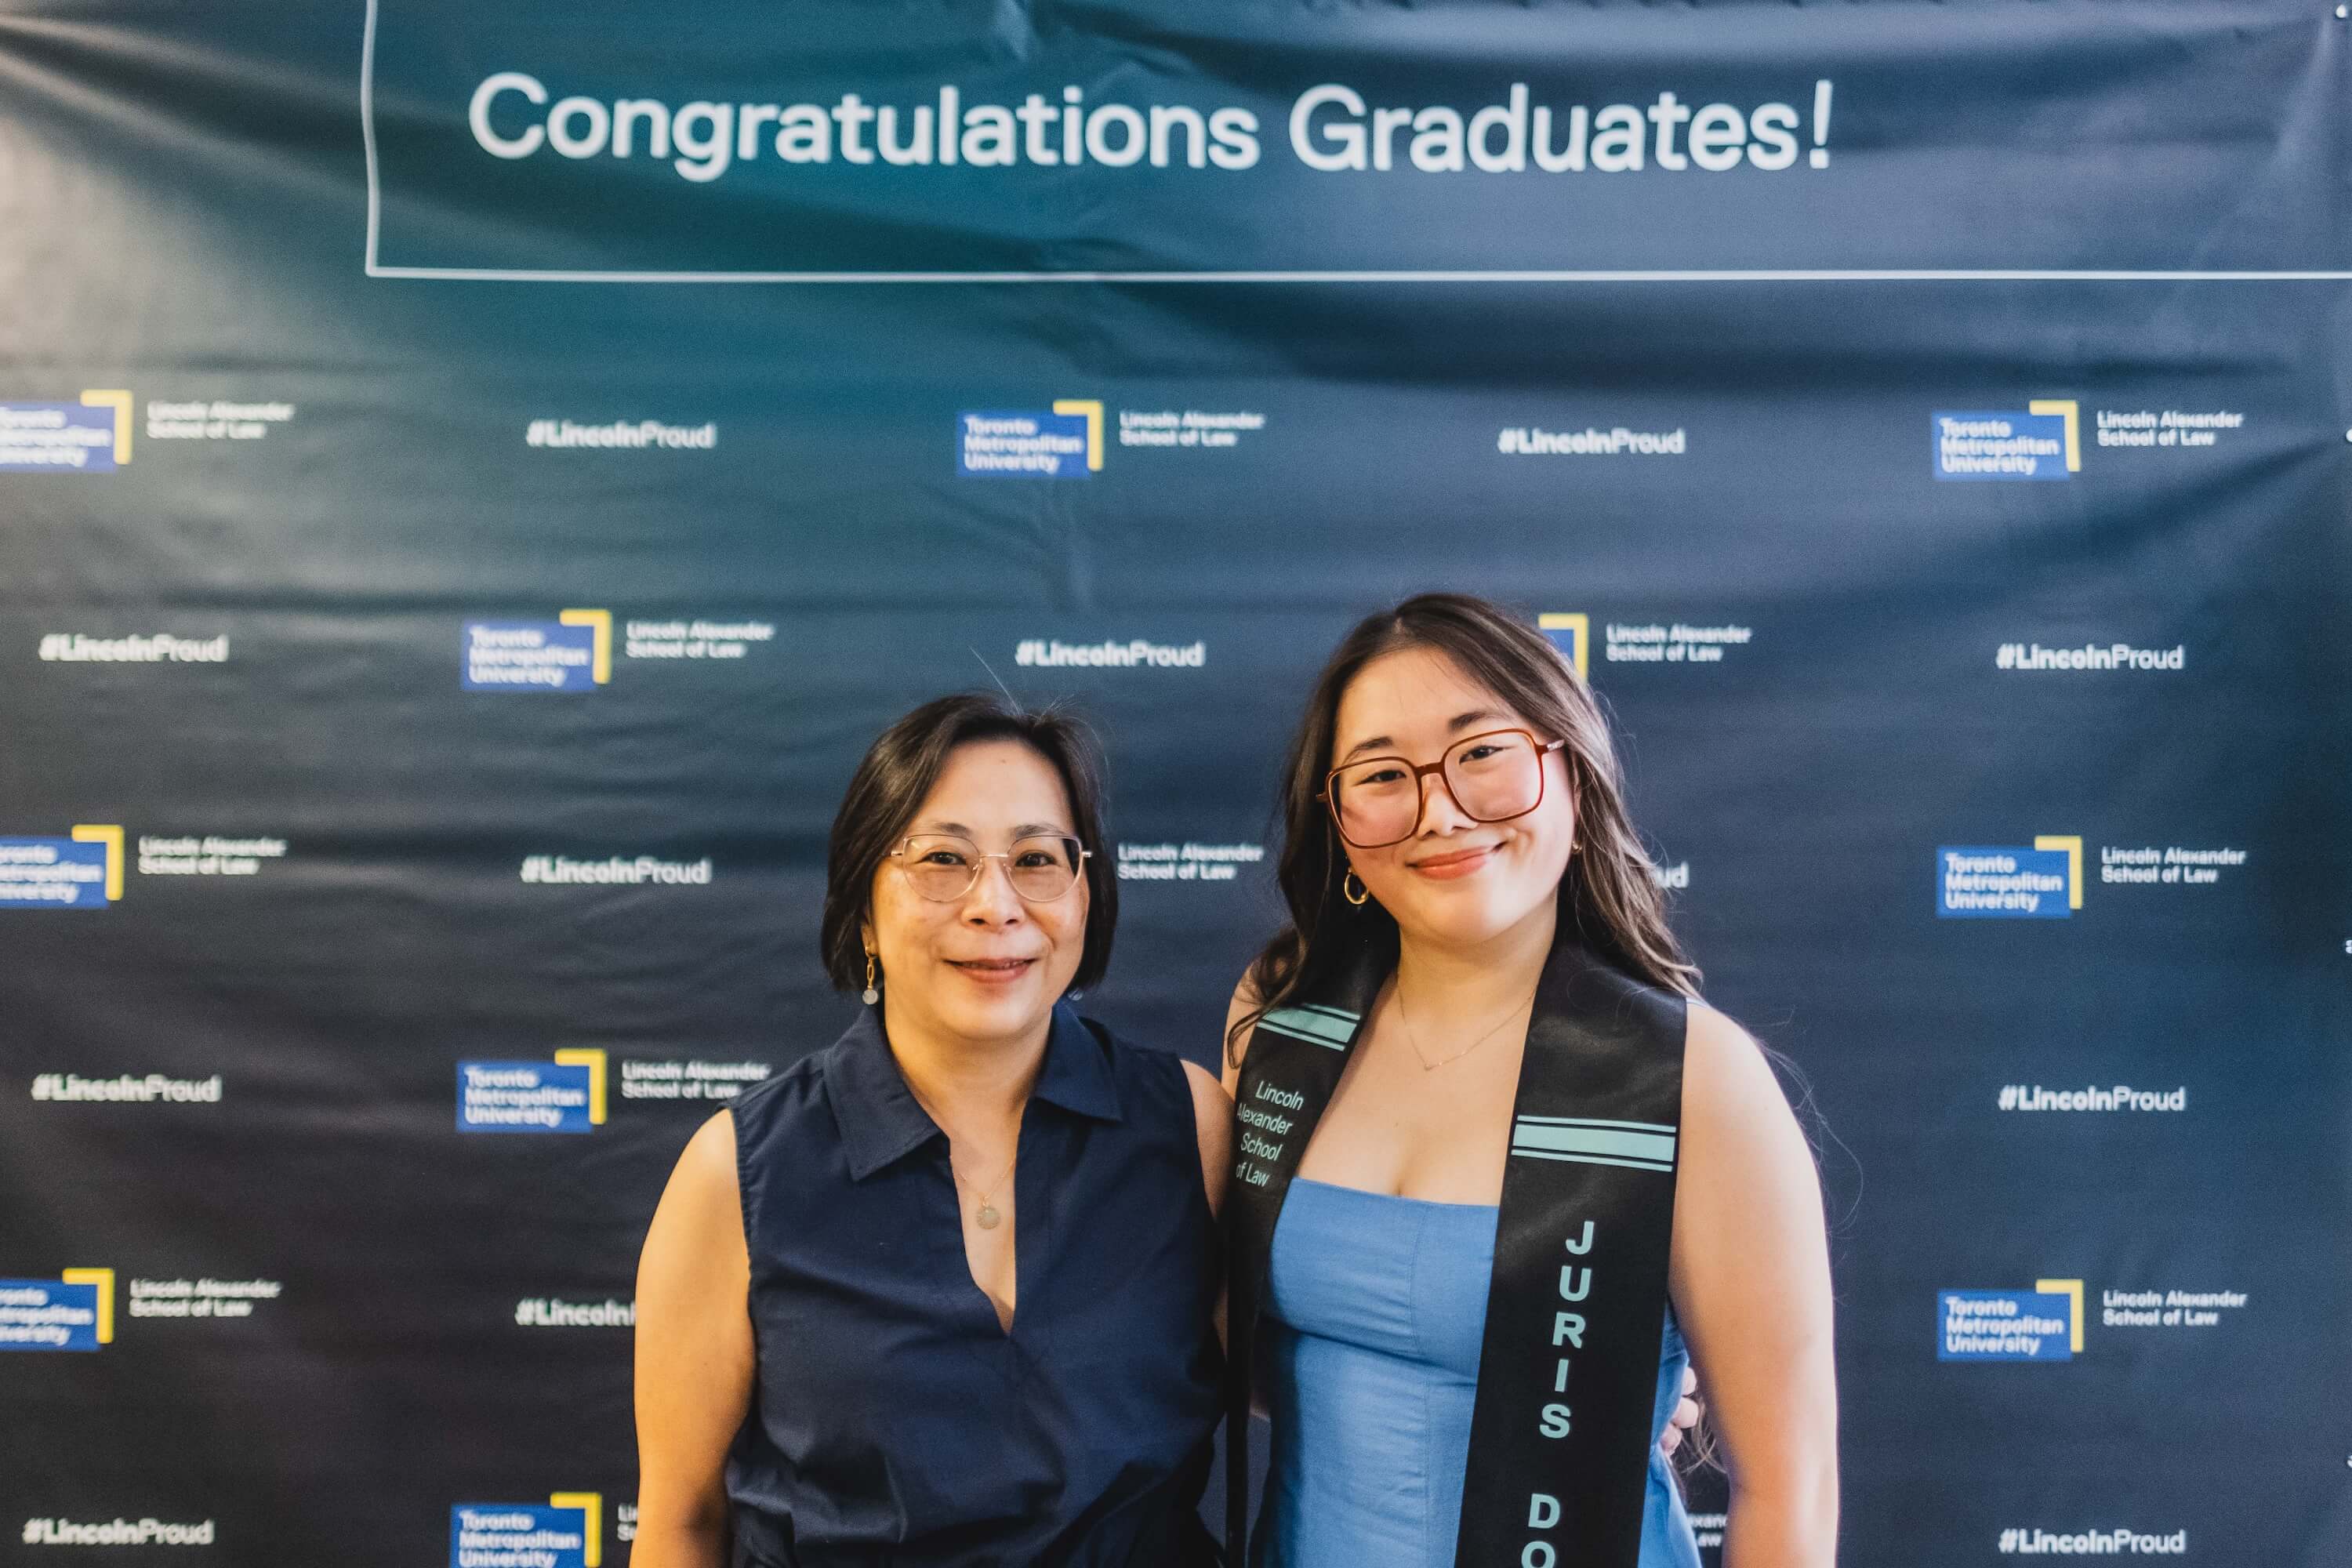 A young woman and a woman posing in front of a backdrop that says "Congratulations Graduate!"